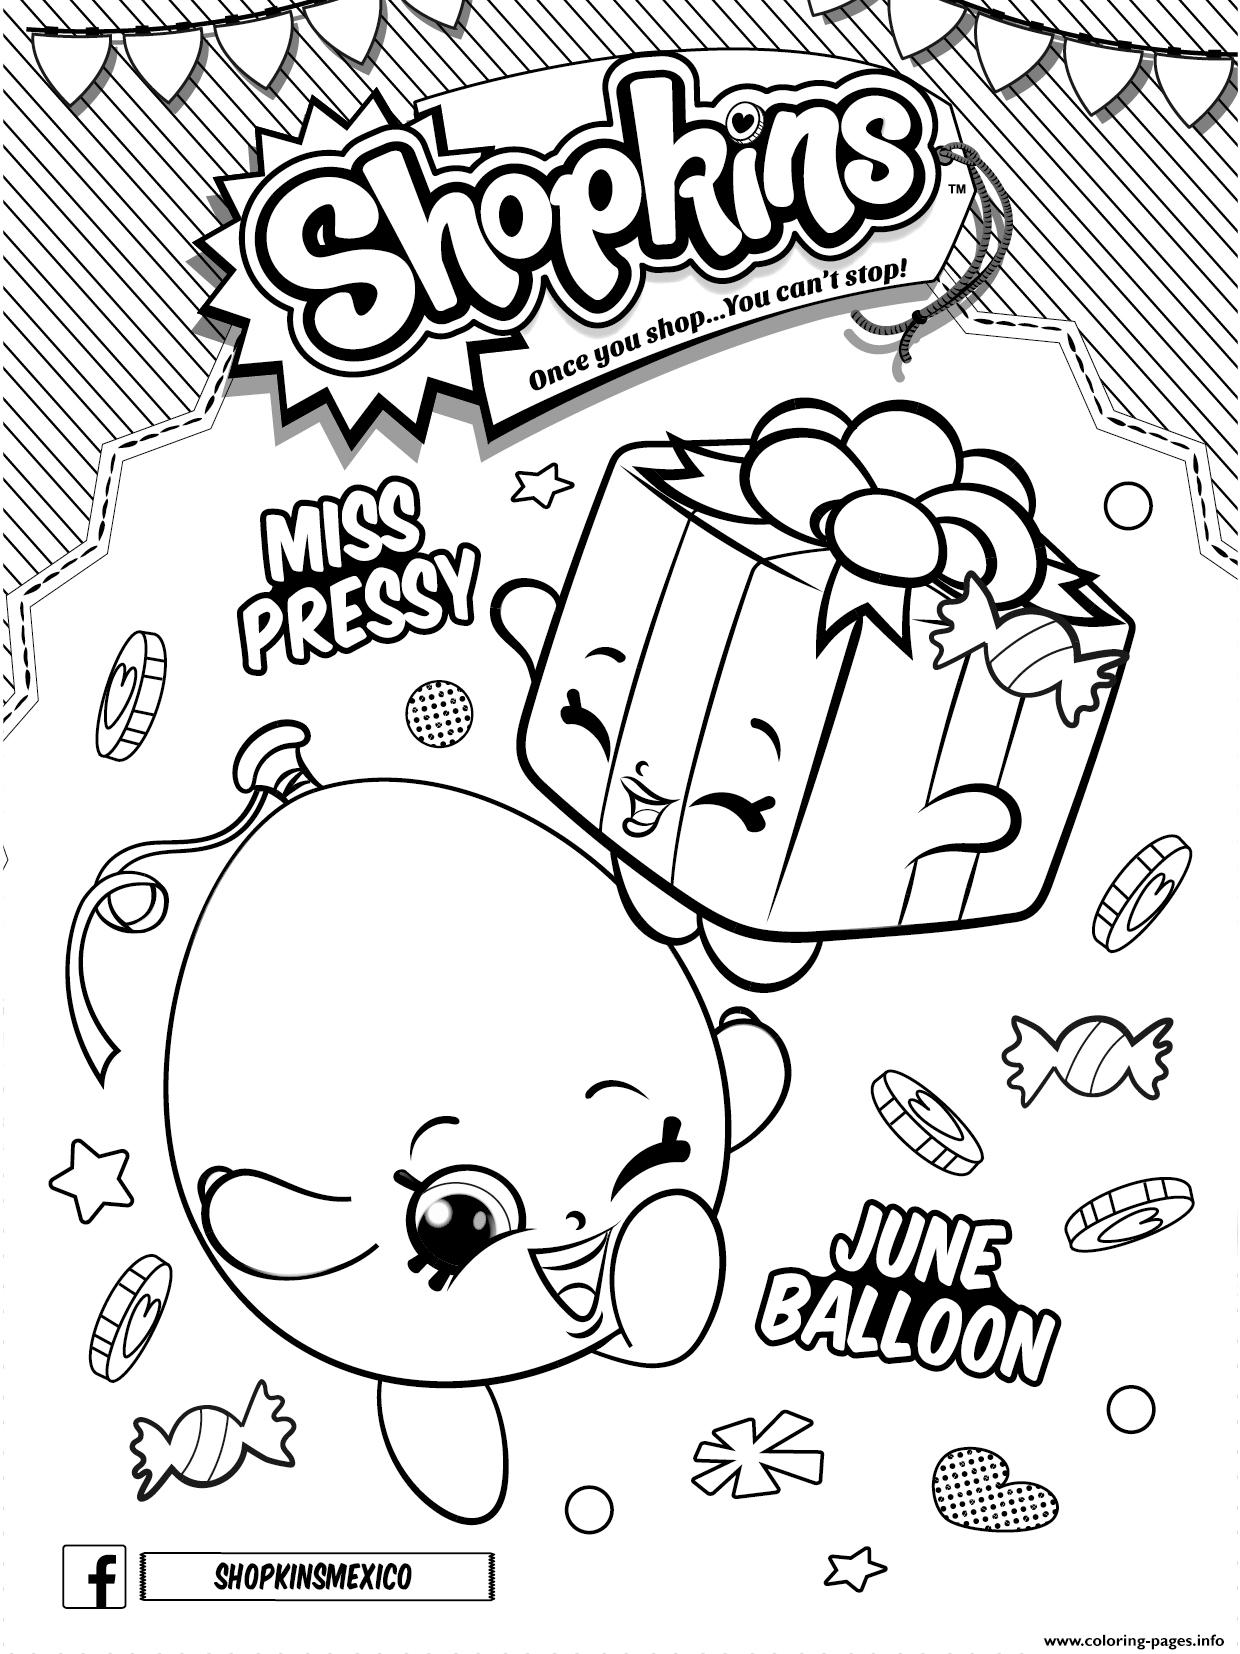 Shopkins Party Pressy June Balloon Coloring Pages Printable Birthday